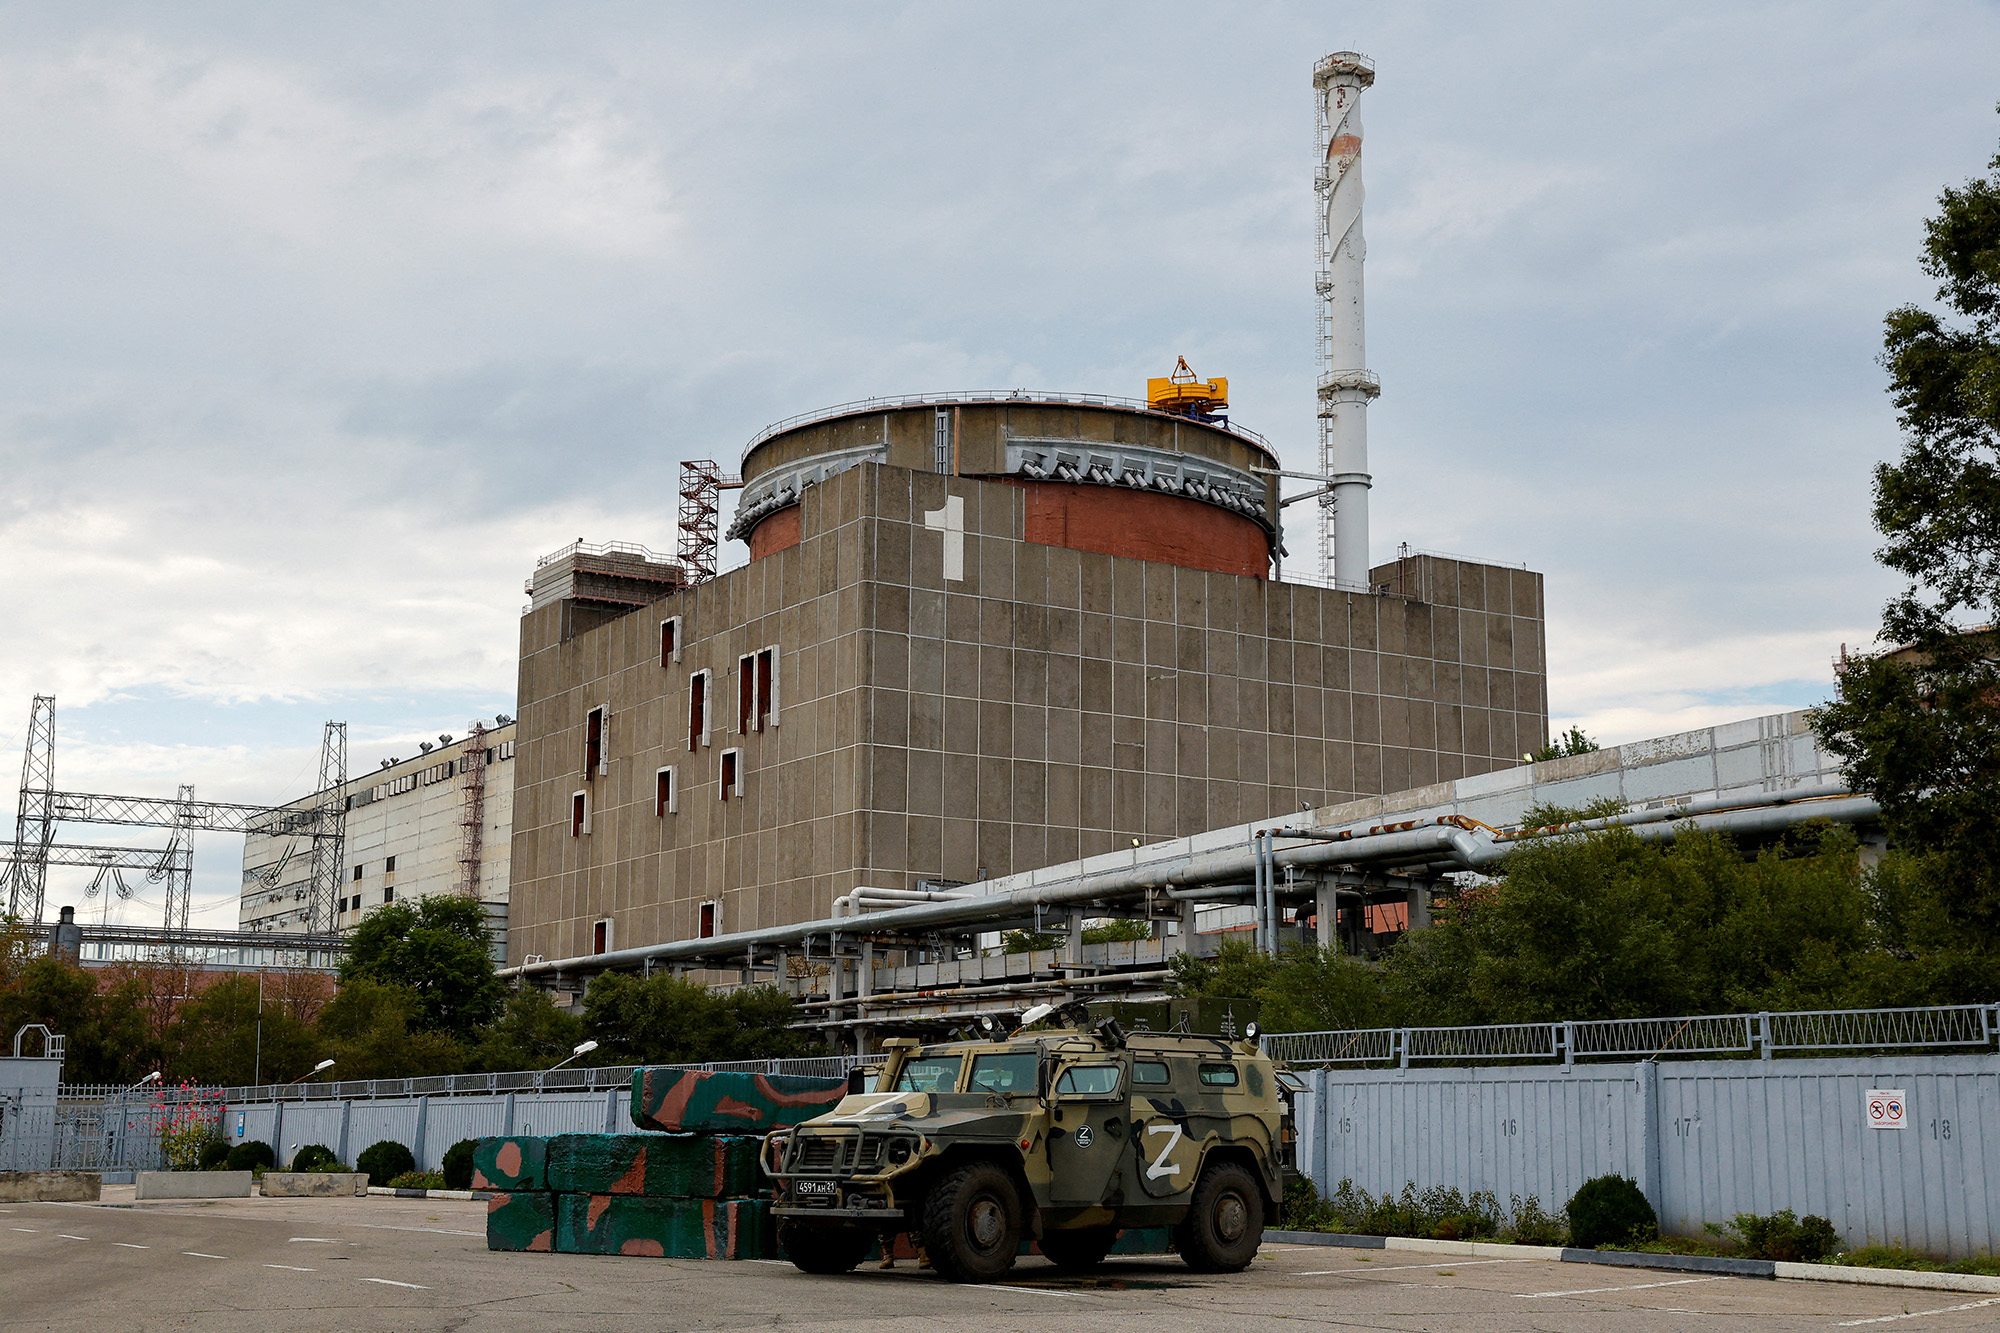 A Russian all-terrain armoured vehicle is parked outside the Zaporizhzhia Nuclear Power Plant during the visit of the International Atomic Energy Agency (IAEA) expert mission in Ukraine, on September 1.